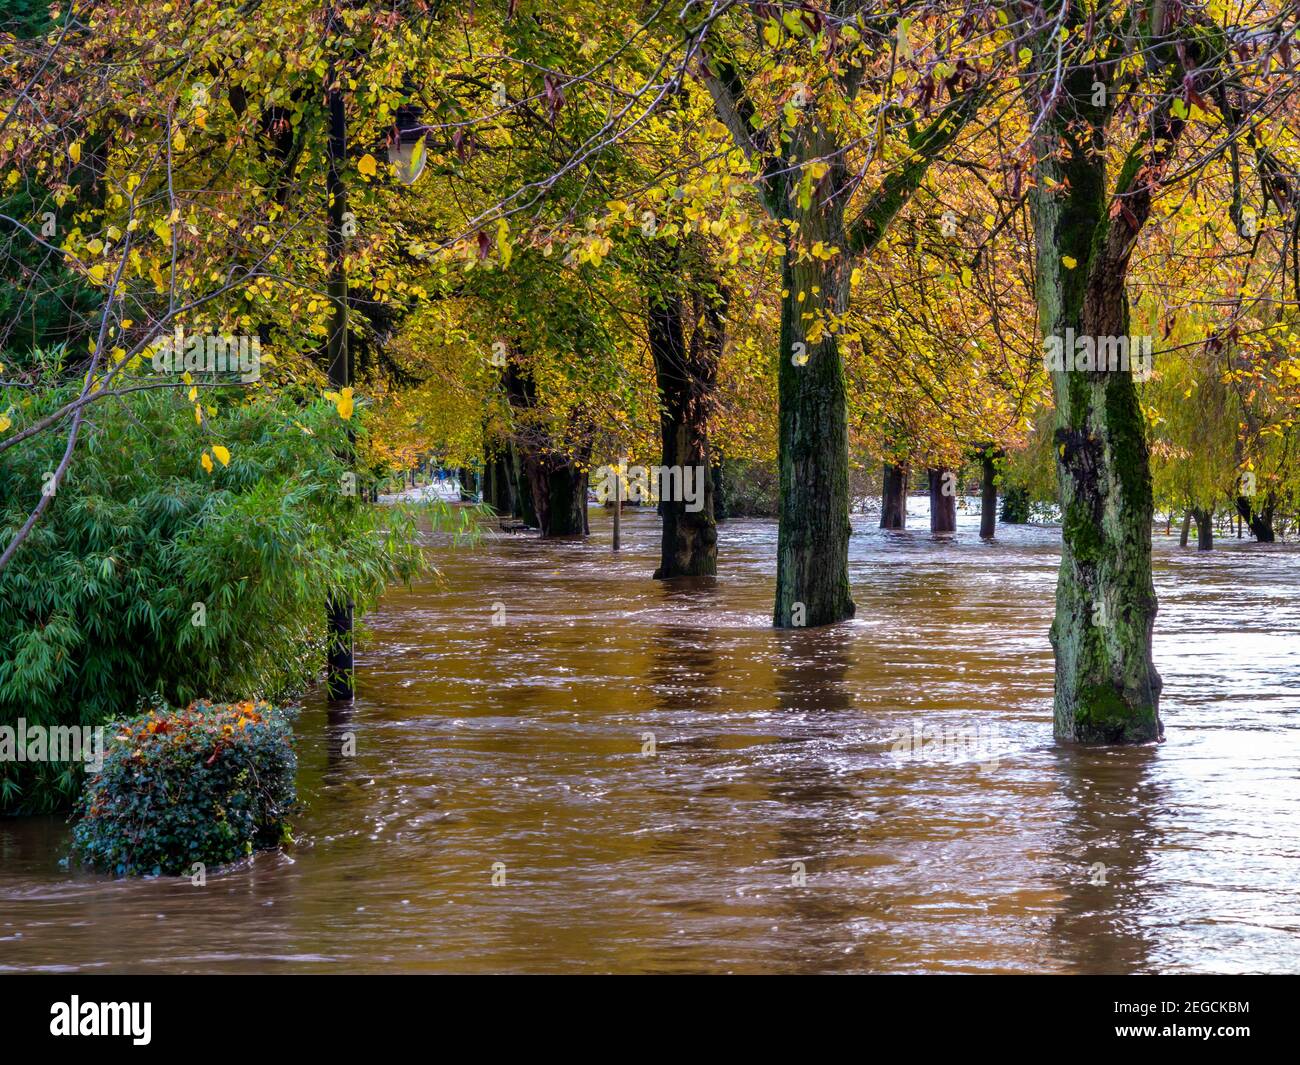 Severe flooding caused by the River Derwent bursting its banks in Hall Leys Park Matlock Derbyshire Peak District England UK in November 2019 Stock Photo